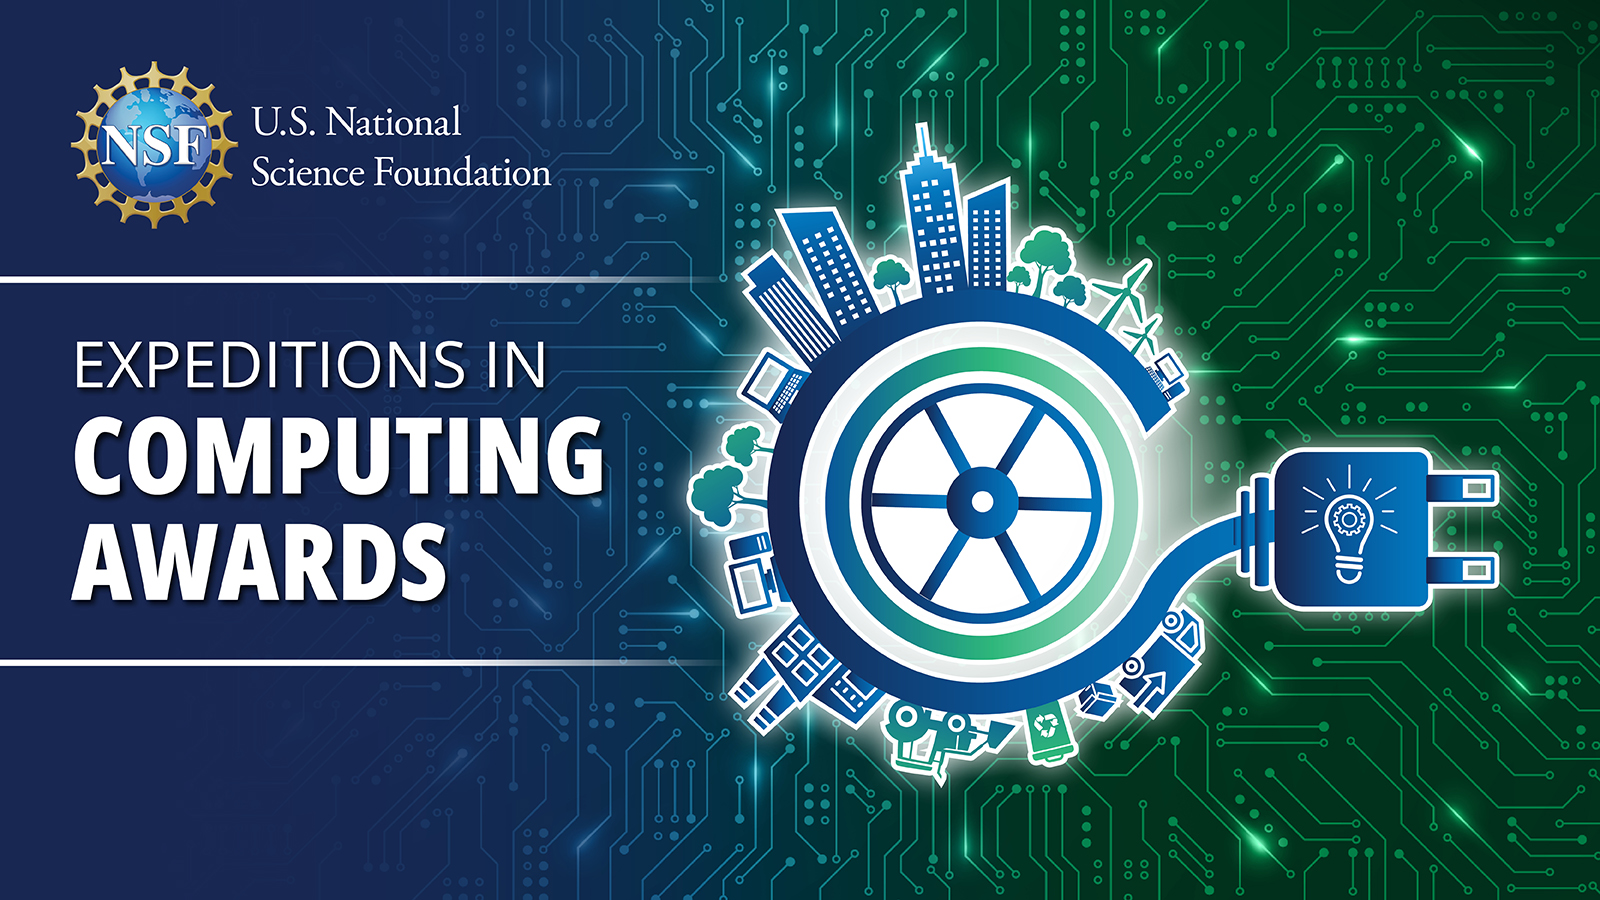 A graphic showing the NSF logo, text that says expeditions in computing awards, and an abstract image representing a spooled power cord wrapped around a wheel, with a city skyline growing out of the outer rim, all over a blue and green background made to look like a circuit board